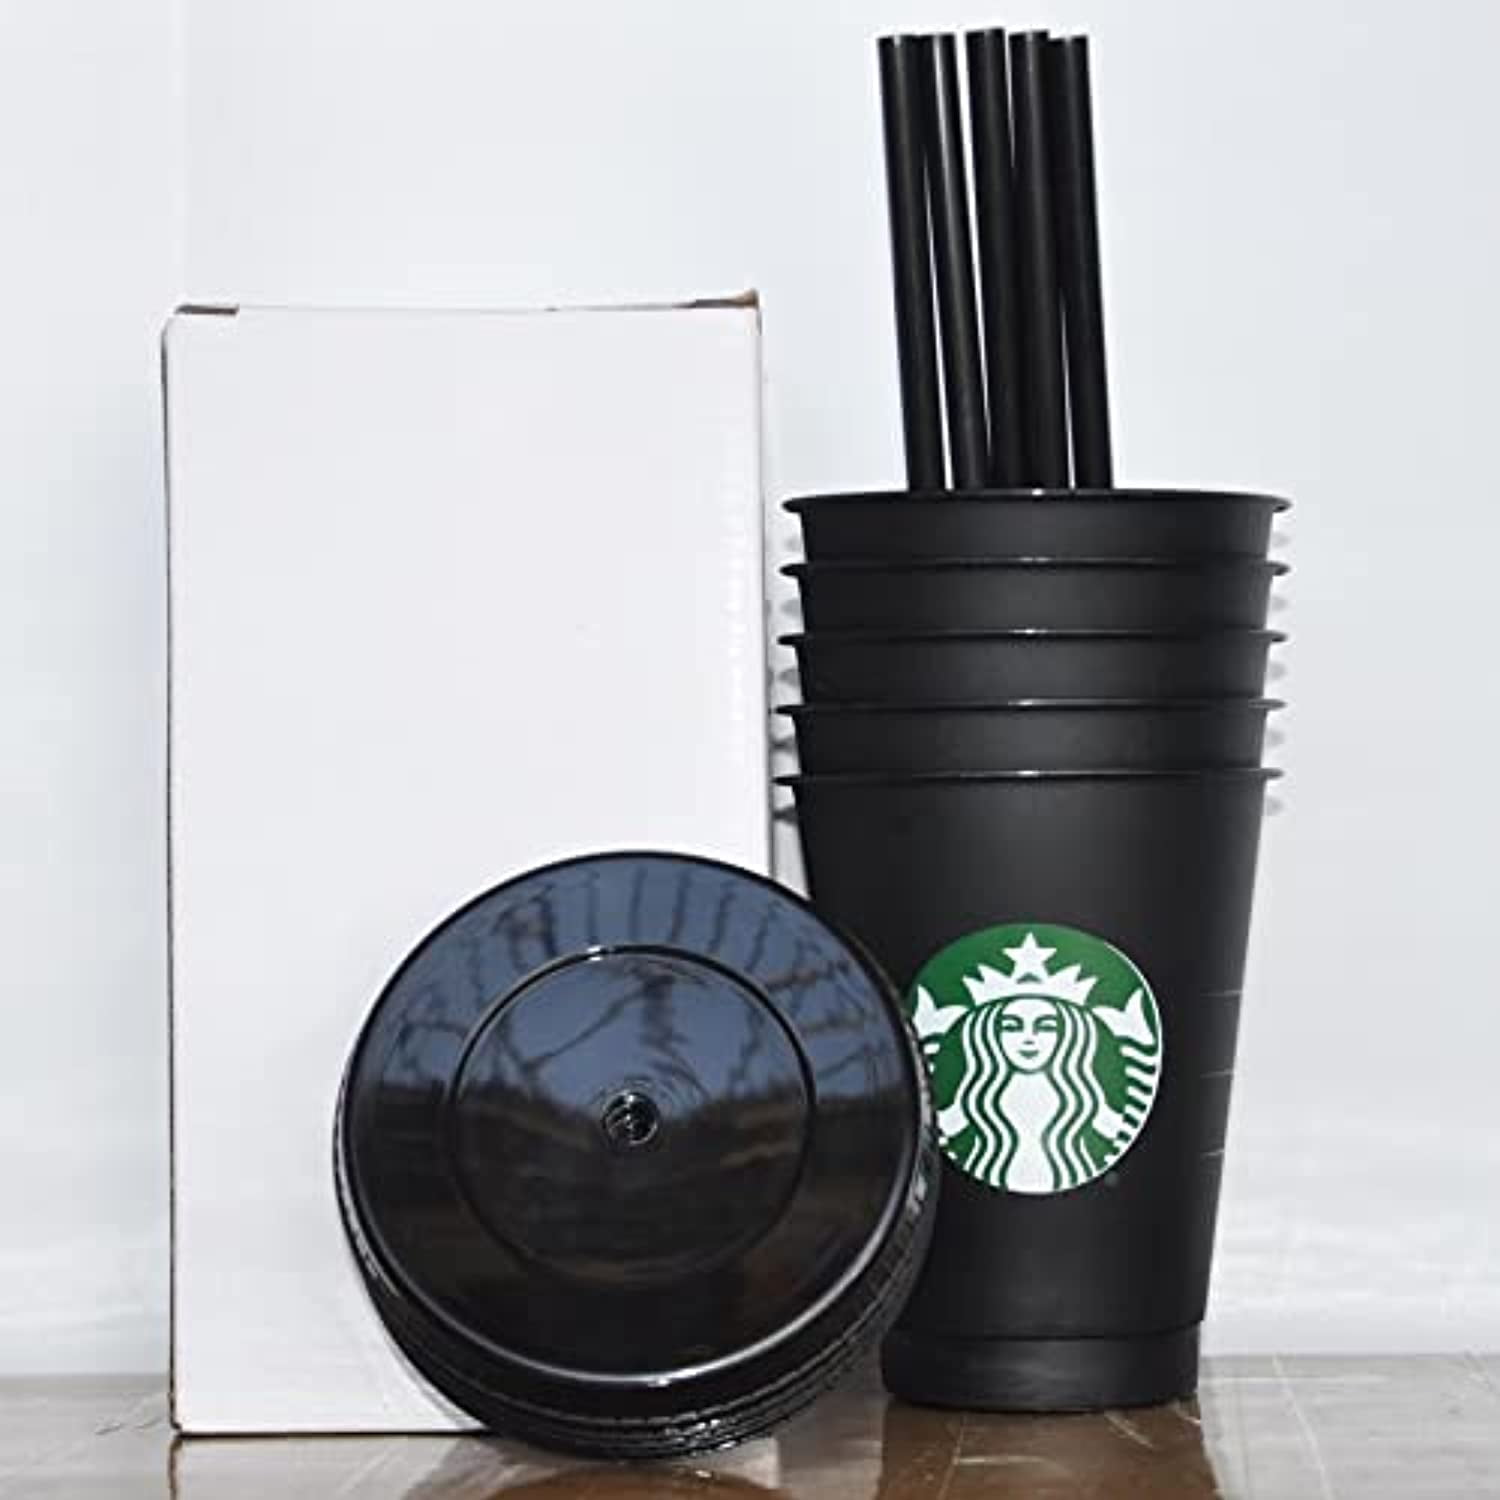 Does Starbucks' US locations sell cold cup 16oz grande reusable